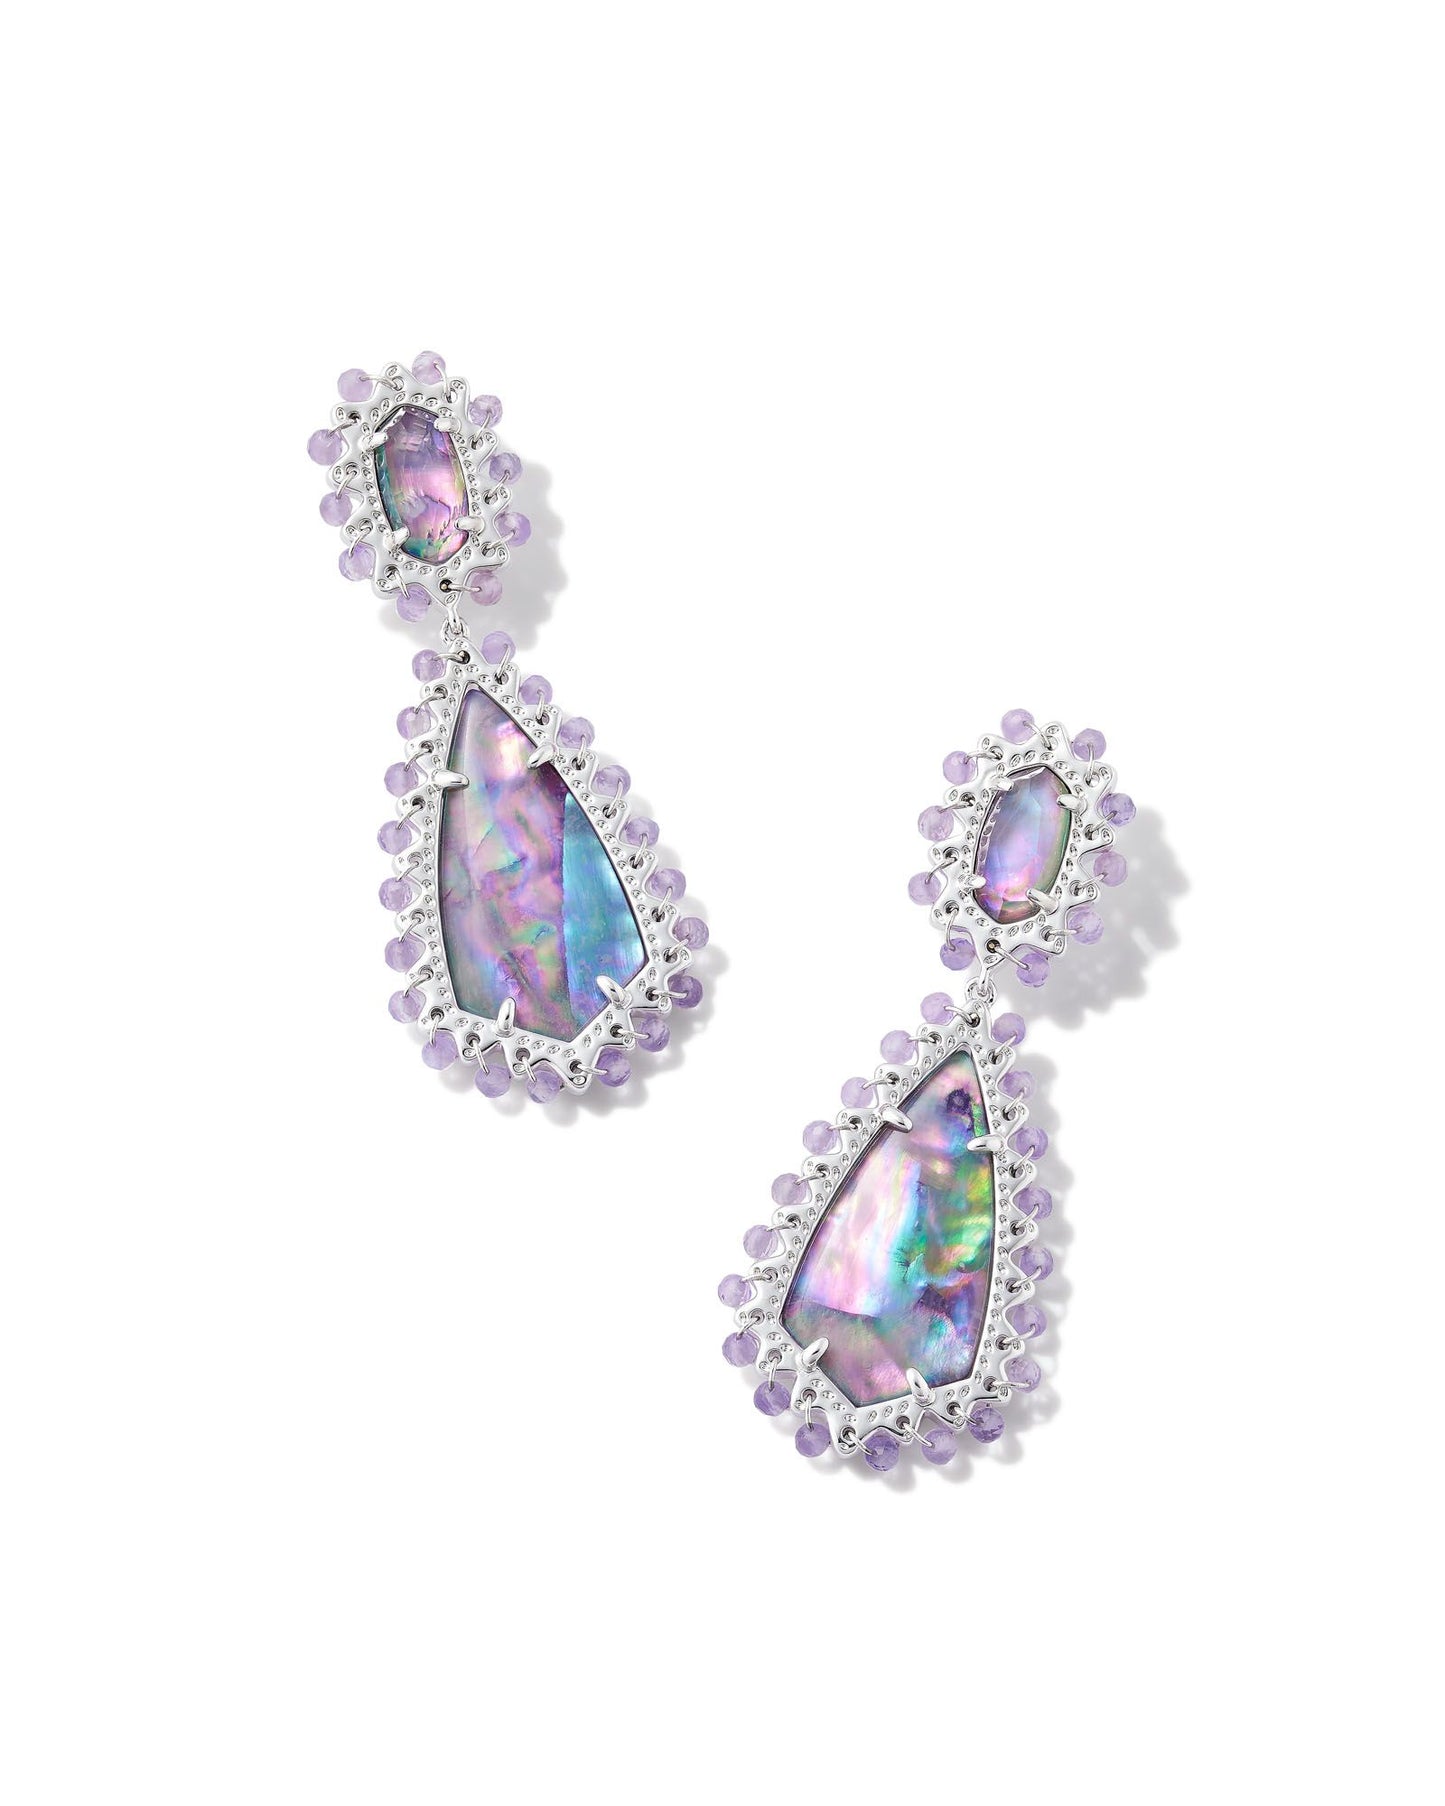 With beads, stones, and iconic brand shapes, the Beaded Camry Statement Earrings in Iridescent Mix really do have it all—grab a pair and get ready to stand out this spring. This metal is 24k rhodium plated over brass with purple beads and iridescent stones. 